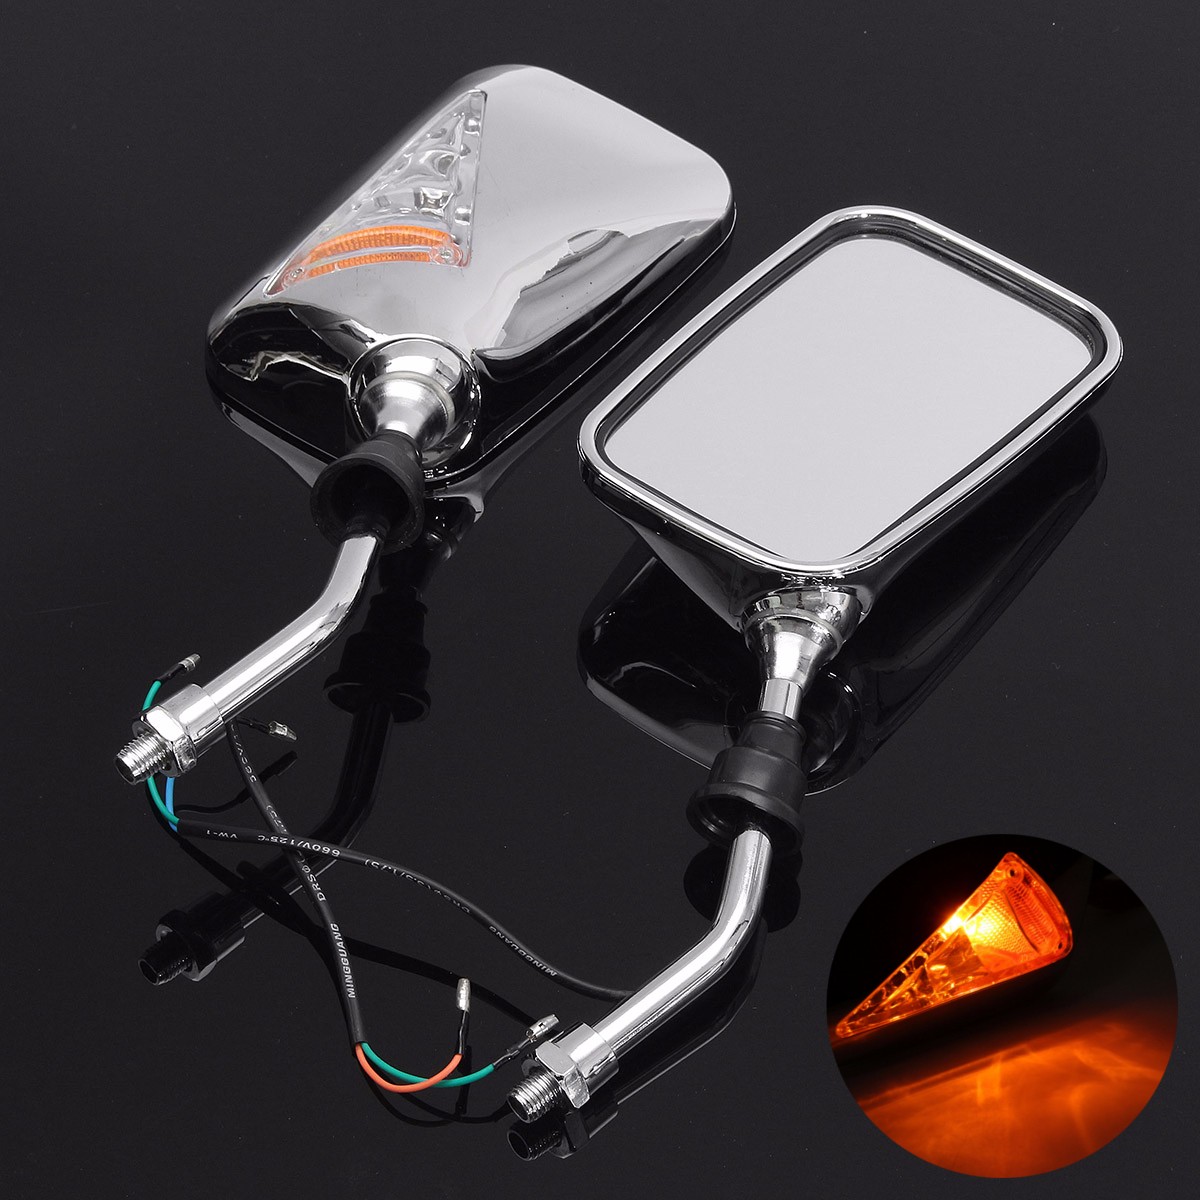 12V Universal for Motorcycles Scooters ATVs Pair Chrome Motorcycle Rearview Side Mirrors with Turn Signal Indicator Light Amber